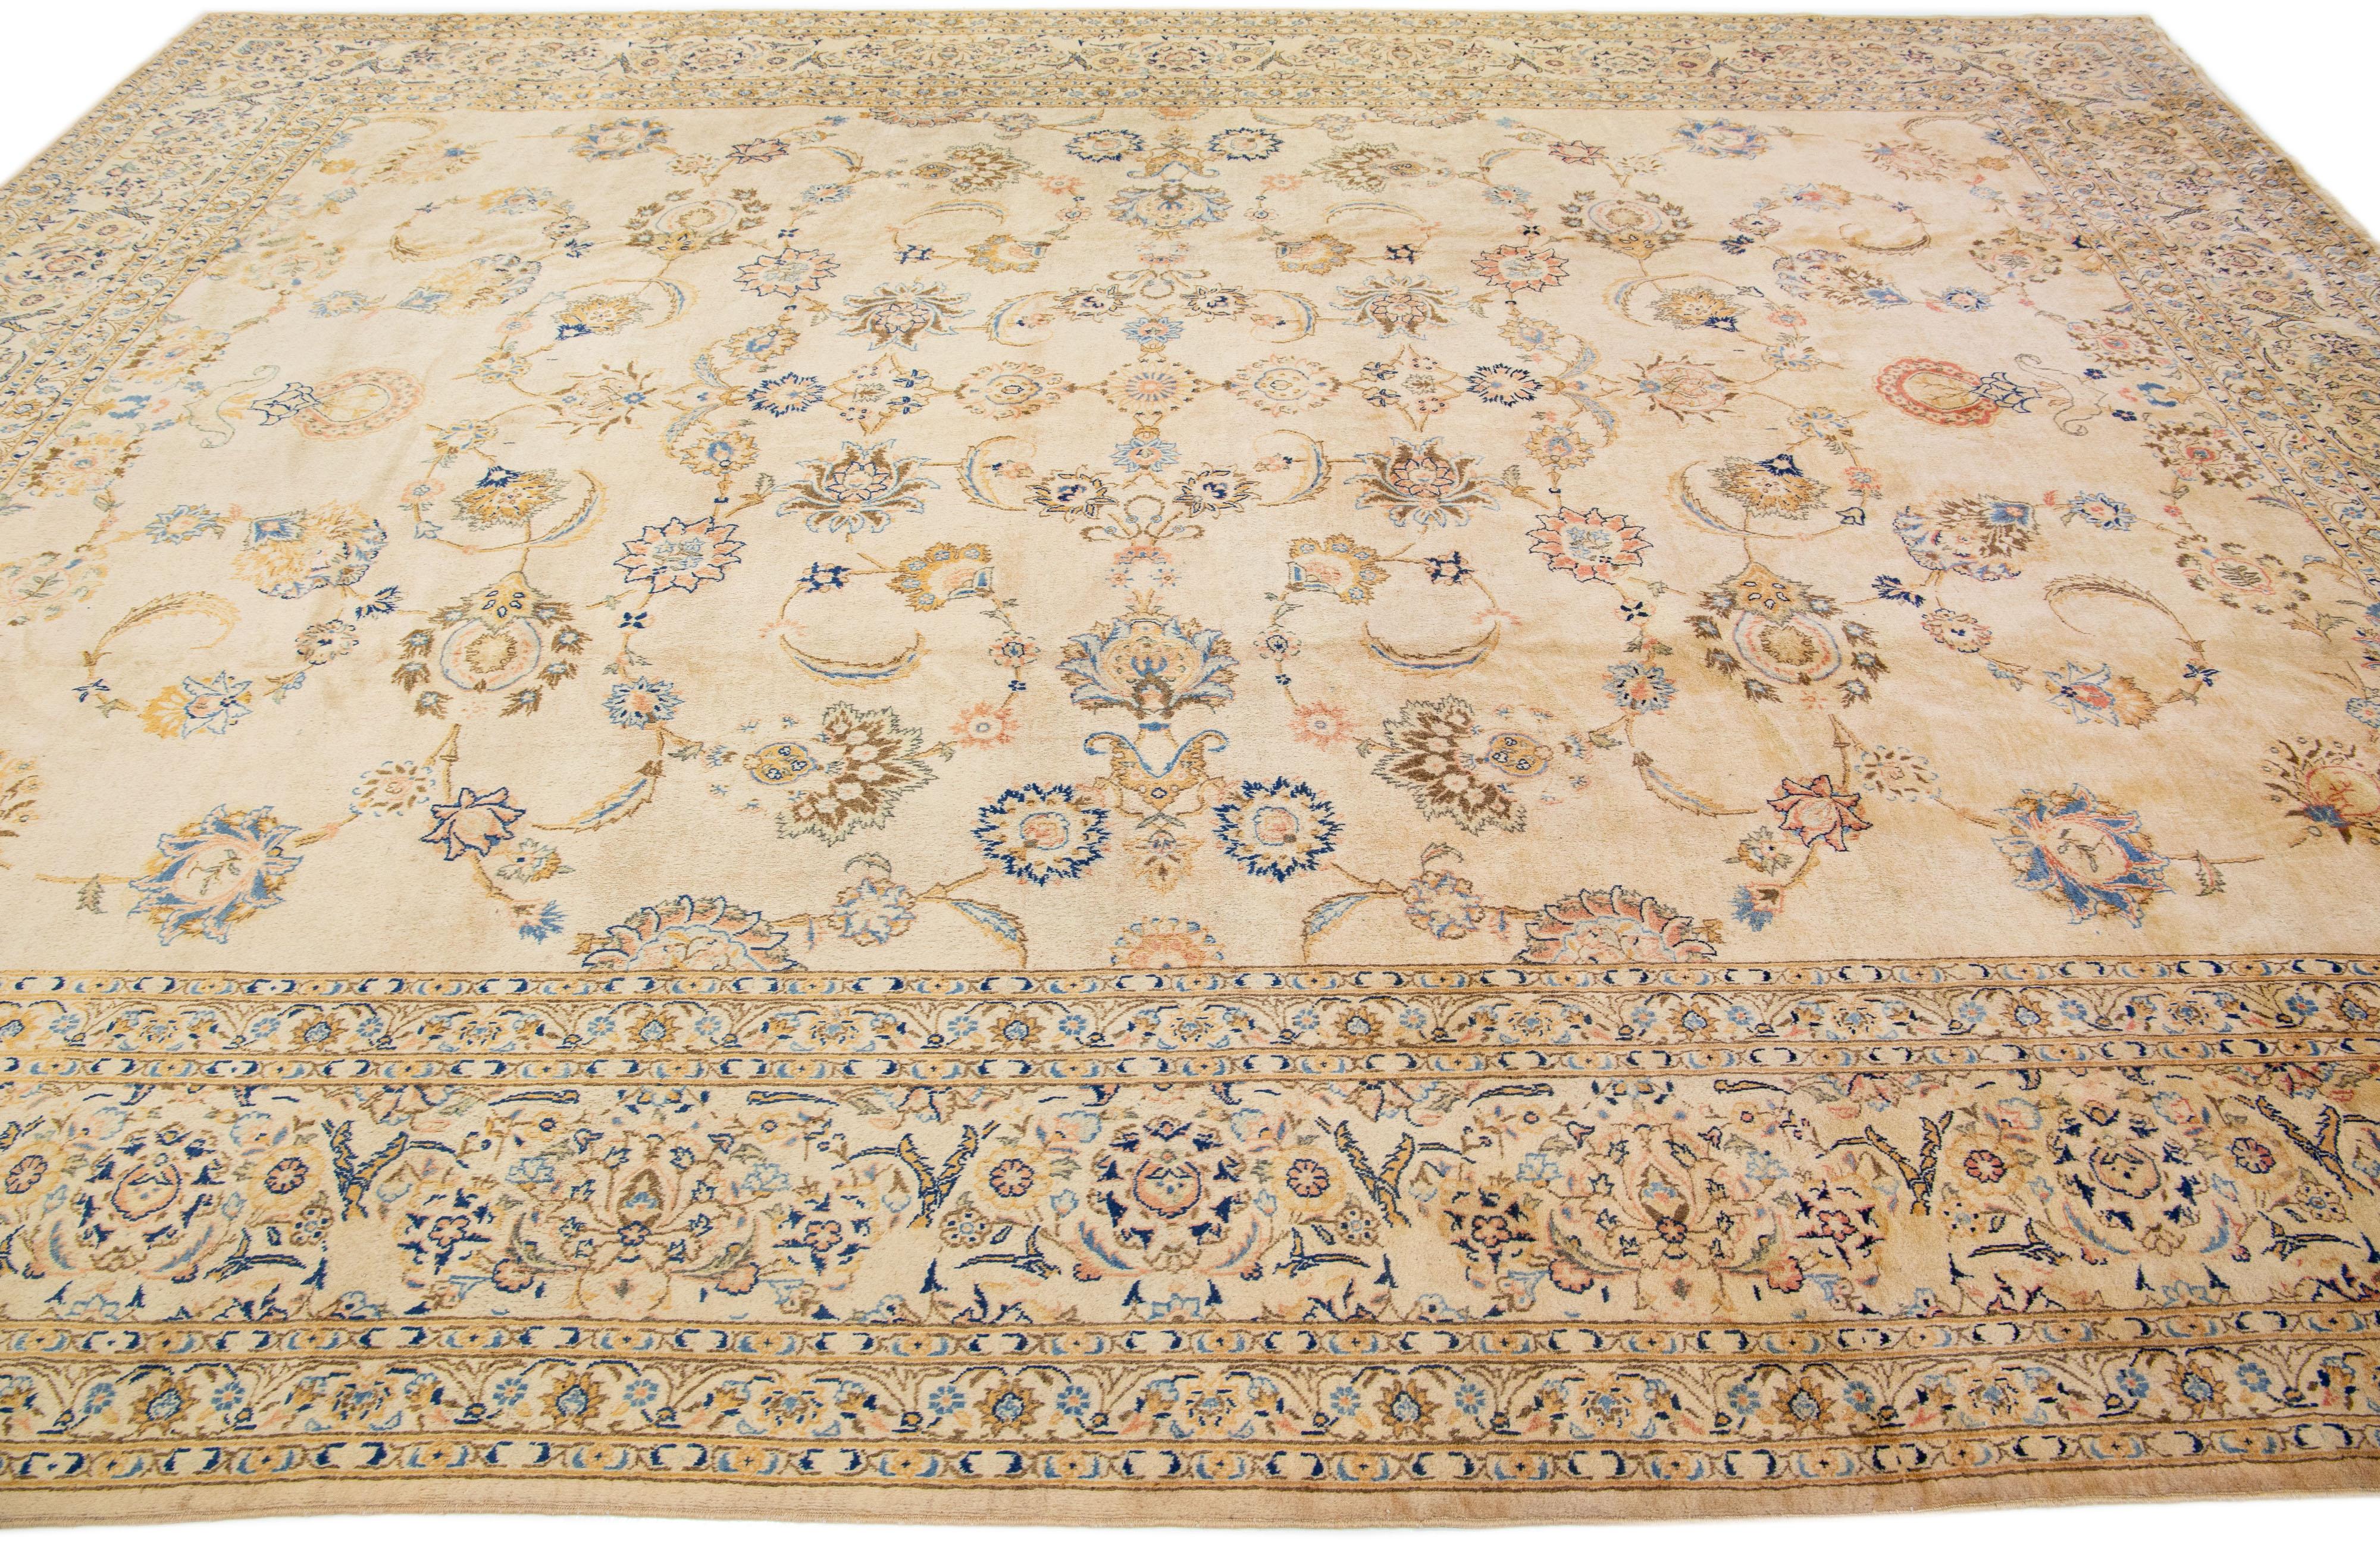 Floral Antique Persian Kashan Handmade Wool Rug in Beige In Excellent Condition For Sale In Norwalk, CT